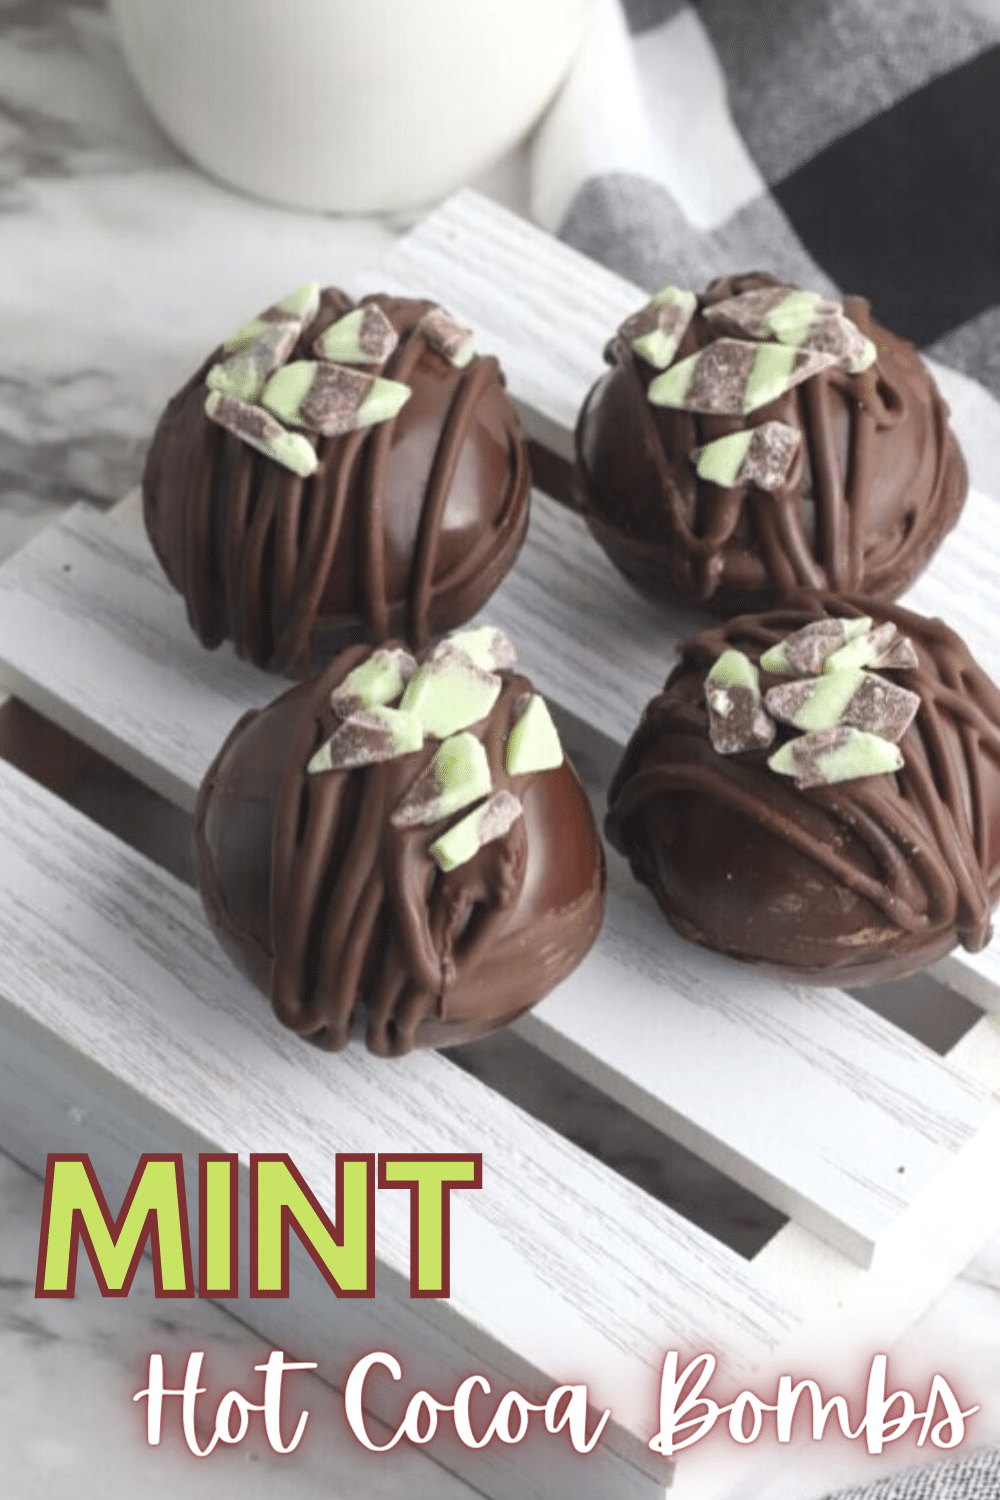 These Mint Hot Cocoa Bombs are a dream come true for mint fans. From your first sip, you're going to love this delicious and easy recipe! #hotcocoabombs #hotcocoa #mint #dessert #recipe via @wondermomwannab